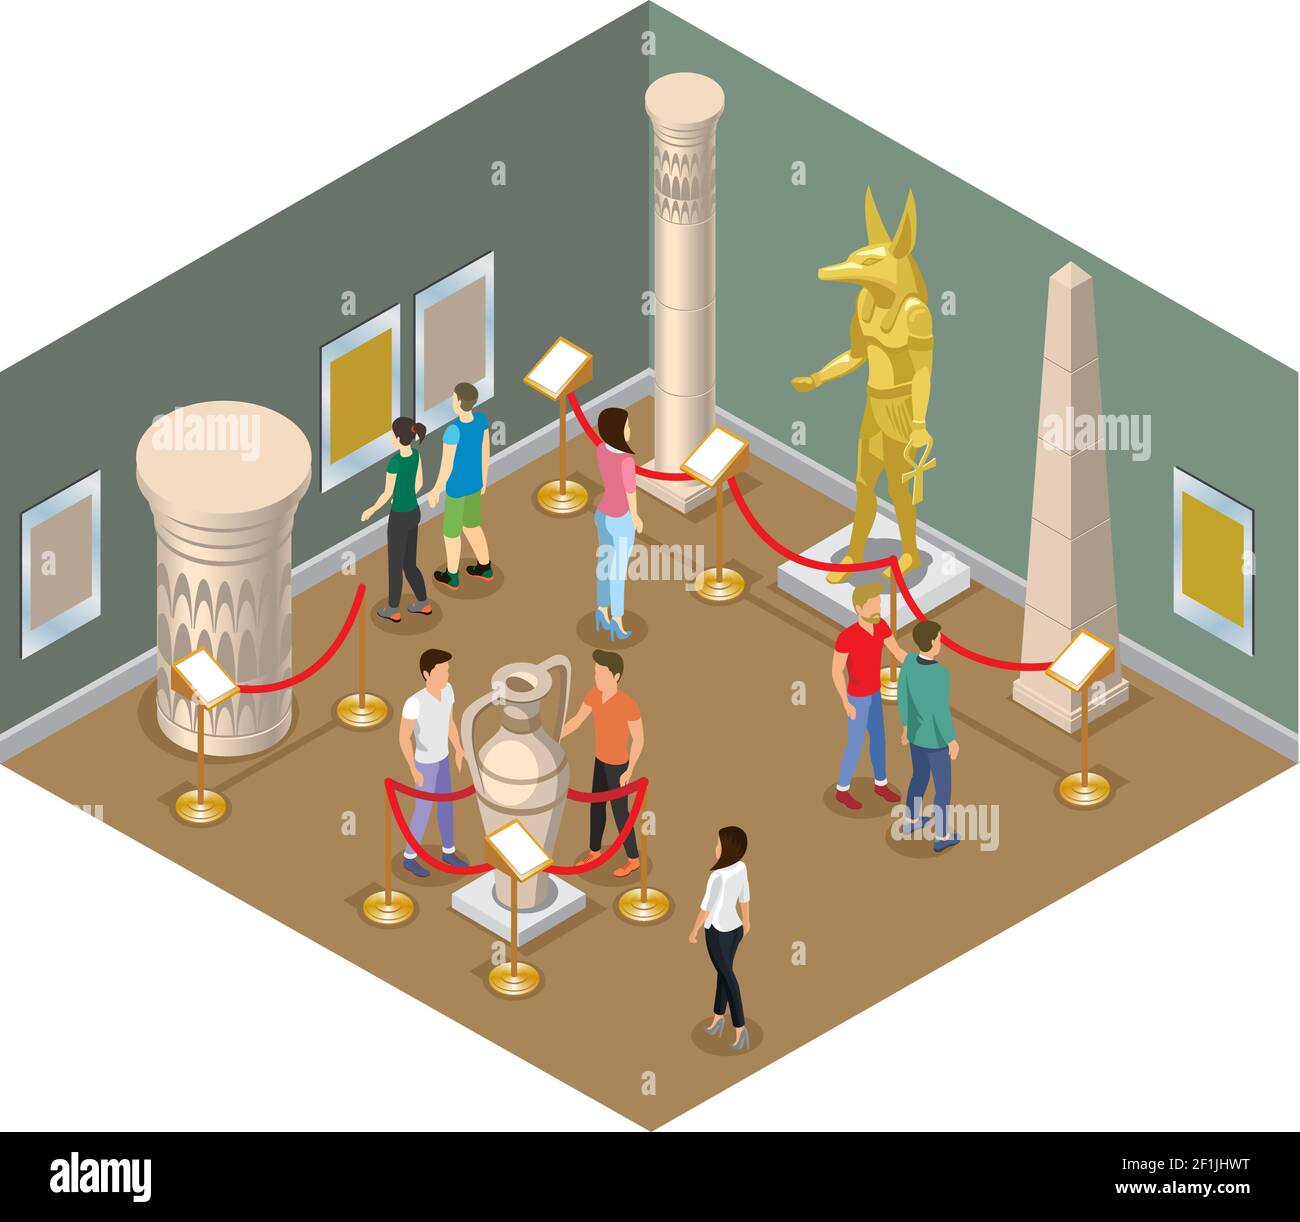 Isometric museum hall concept with visitors view pharaoh statue pictures ancient amphora column and historical buildings isolated vector illustration Stock Vector